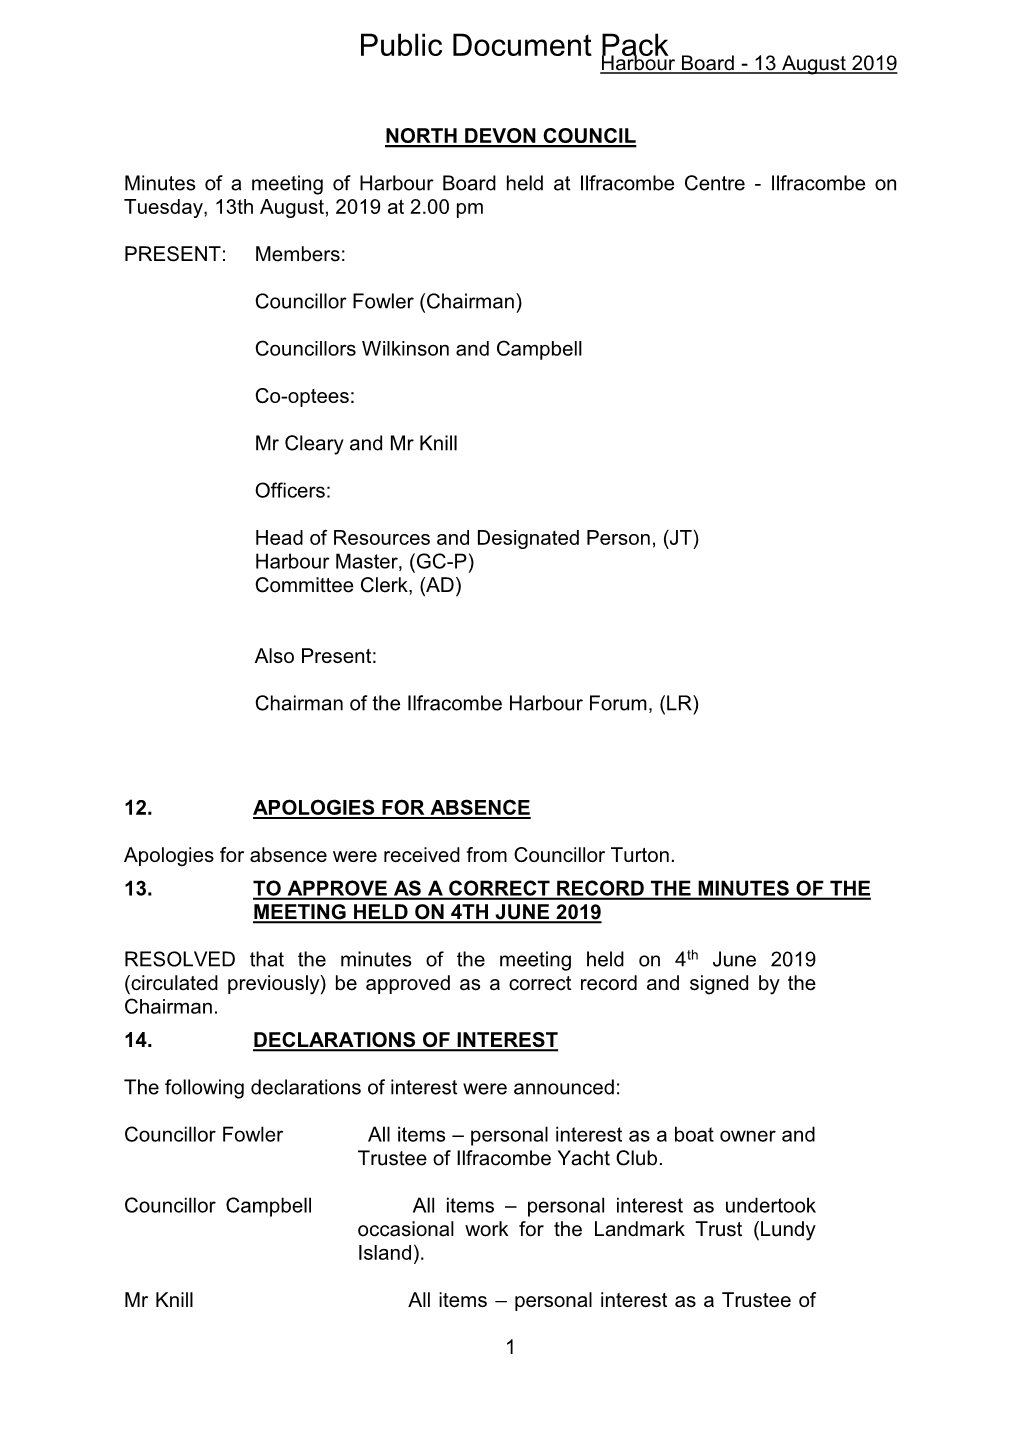 (Public Pack)Minutes Document for Harbour Board, 13/08/2019 14:00